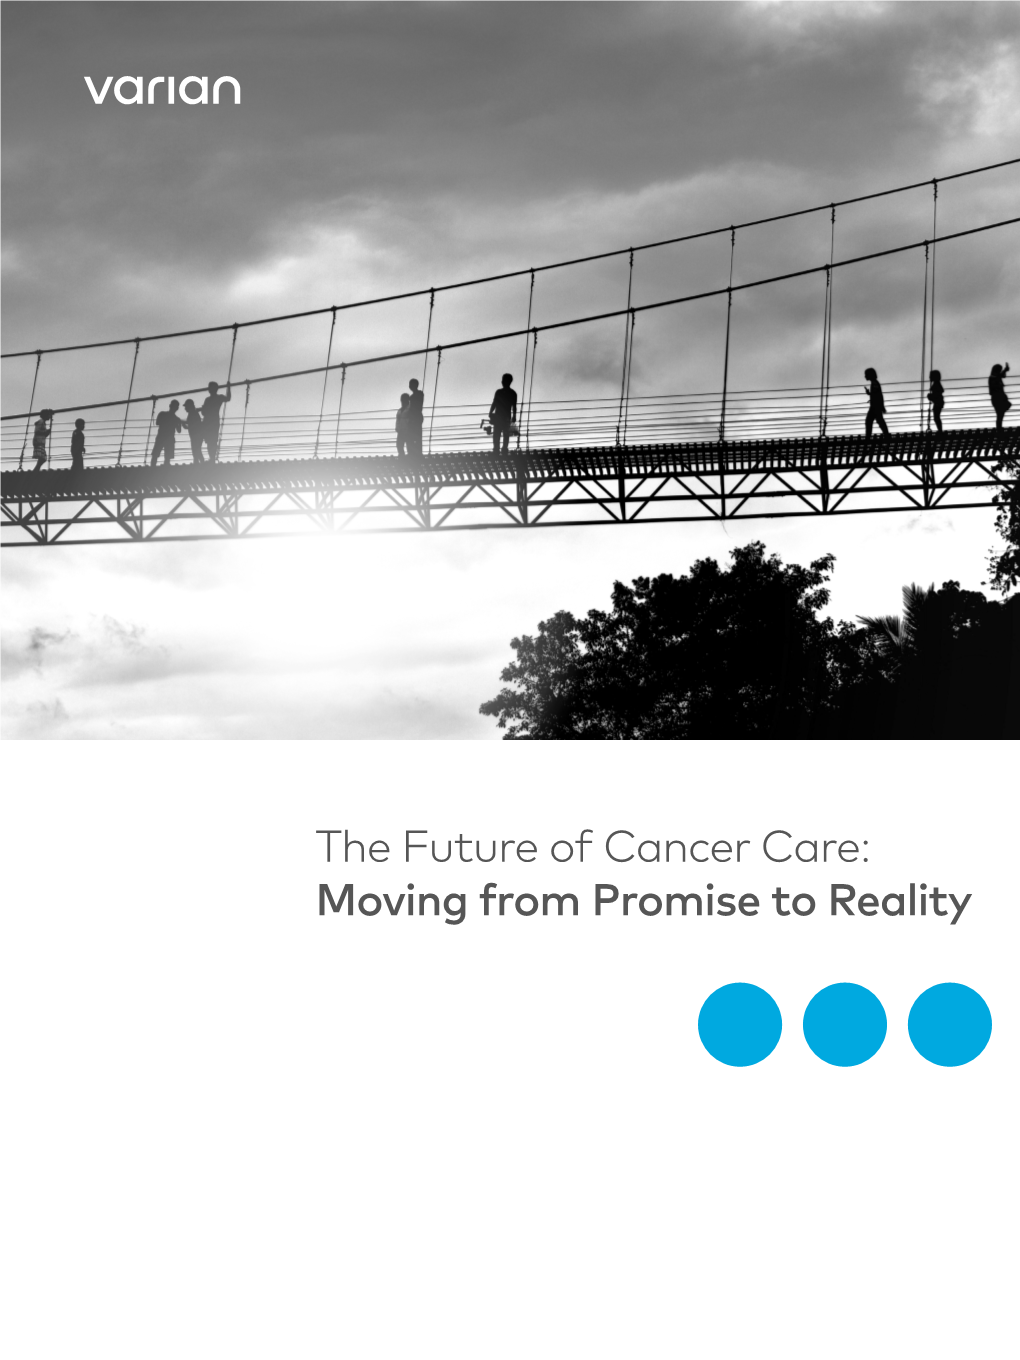 The Future of Cancer Care: Moving from Promise to Reality Snapshot